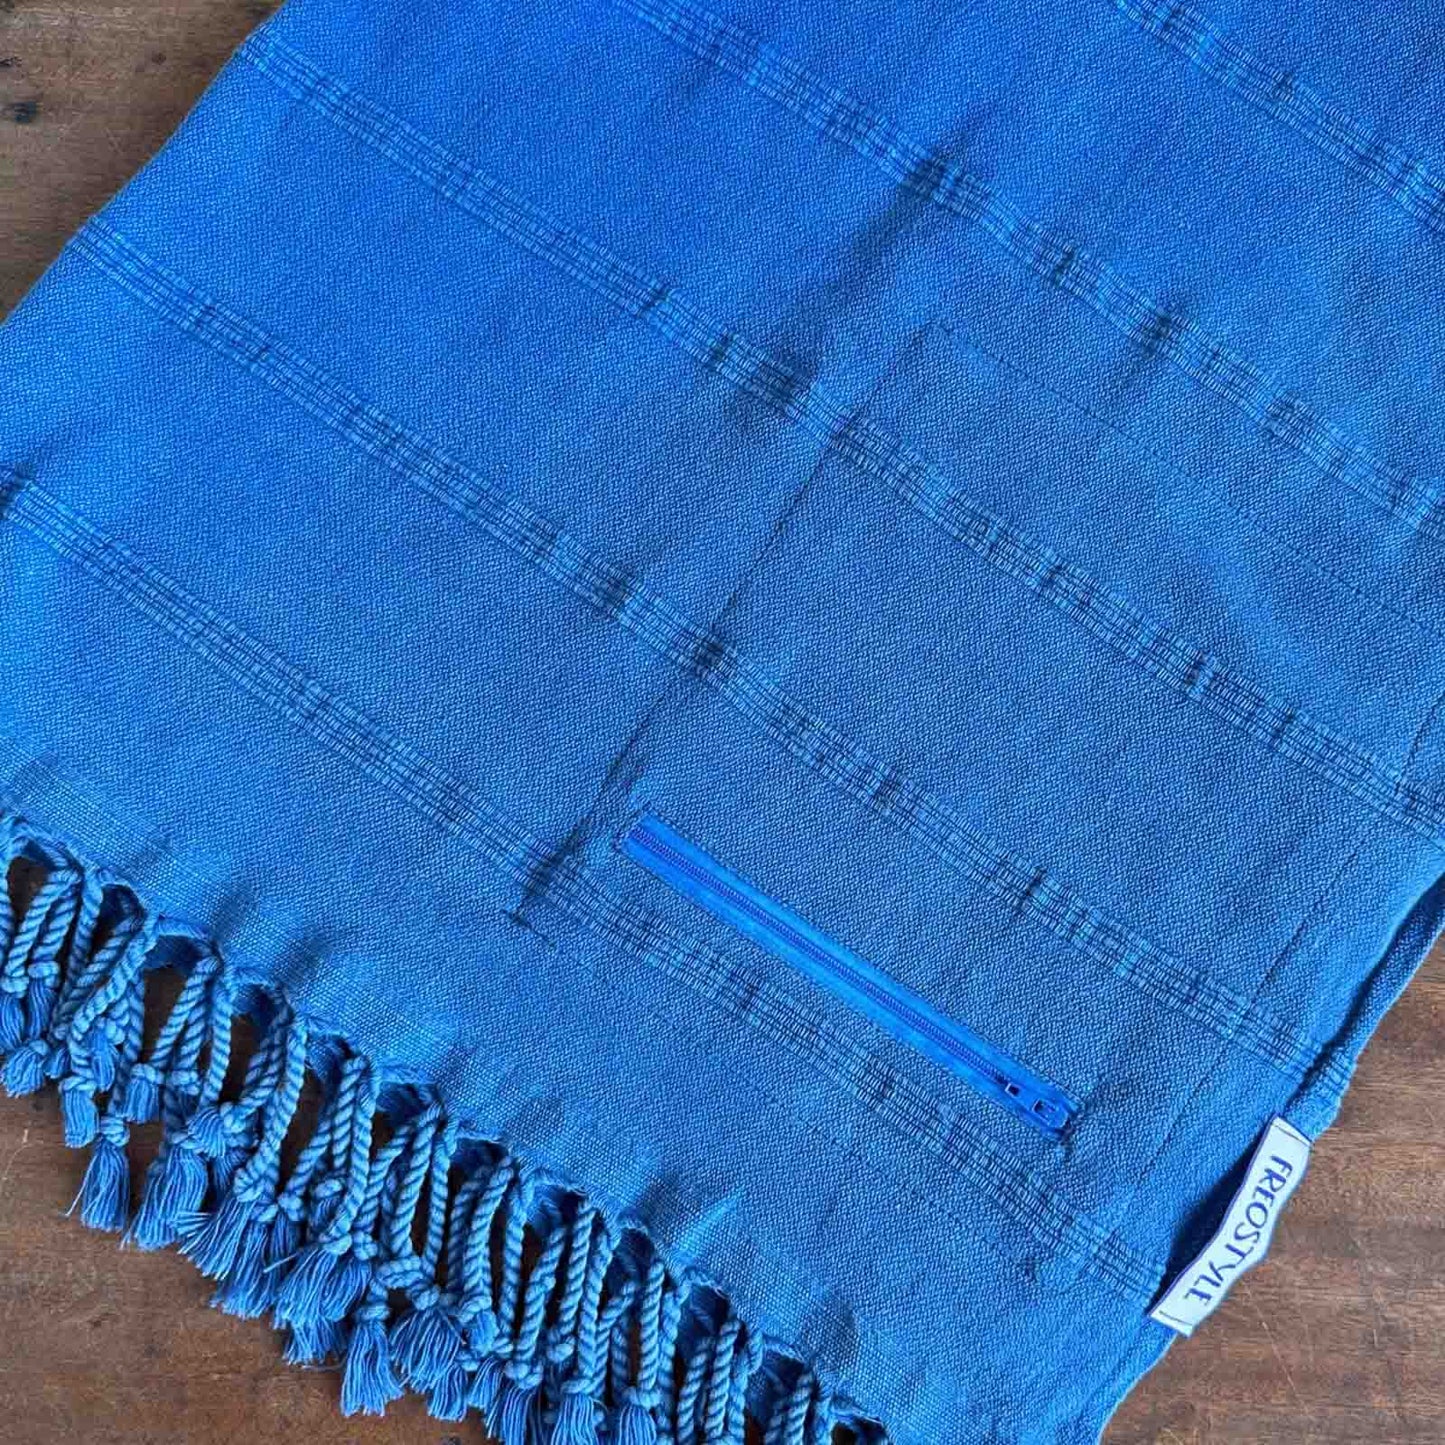 Blue Monday Turkish Towel with Pockets, folded, by Freostyle